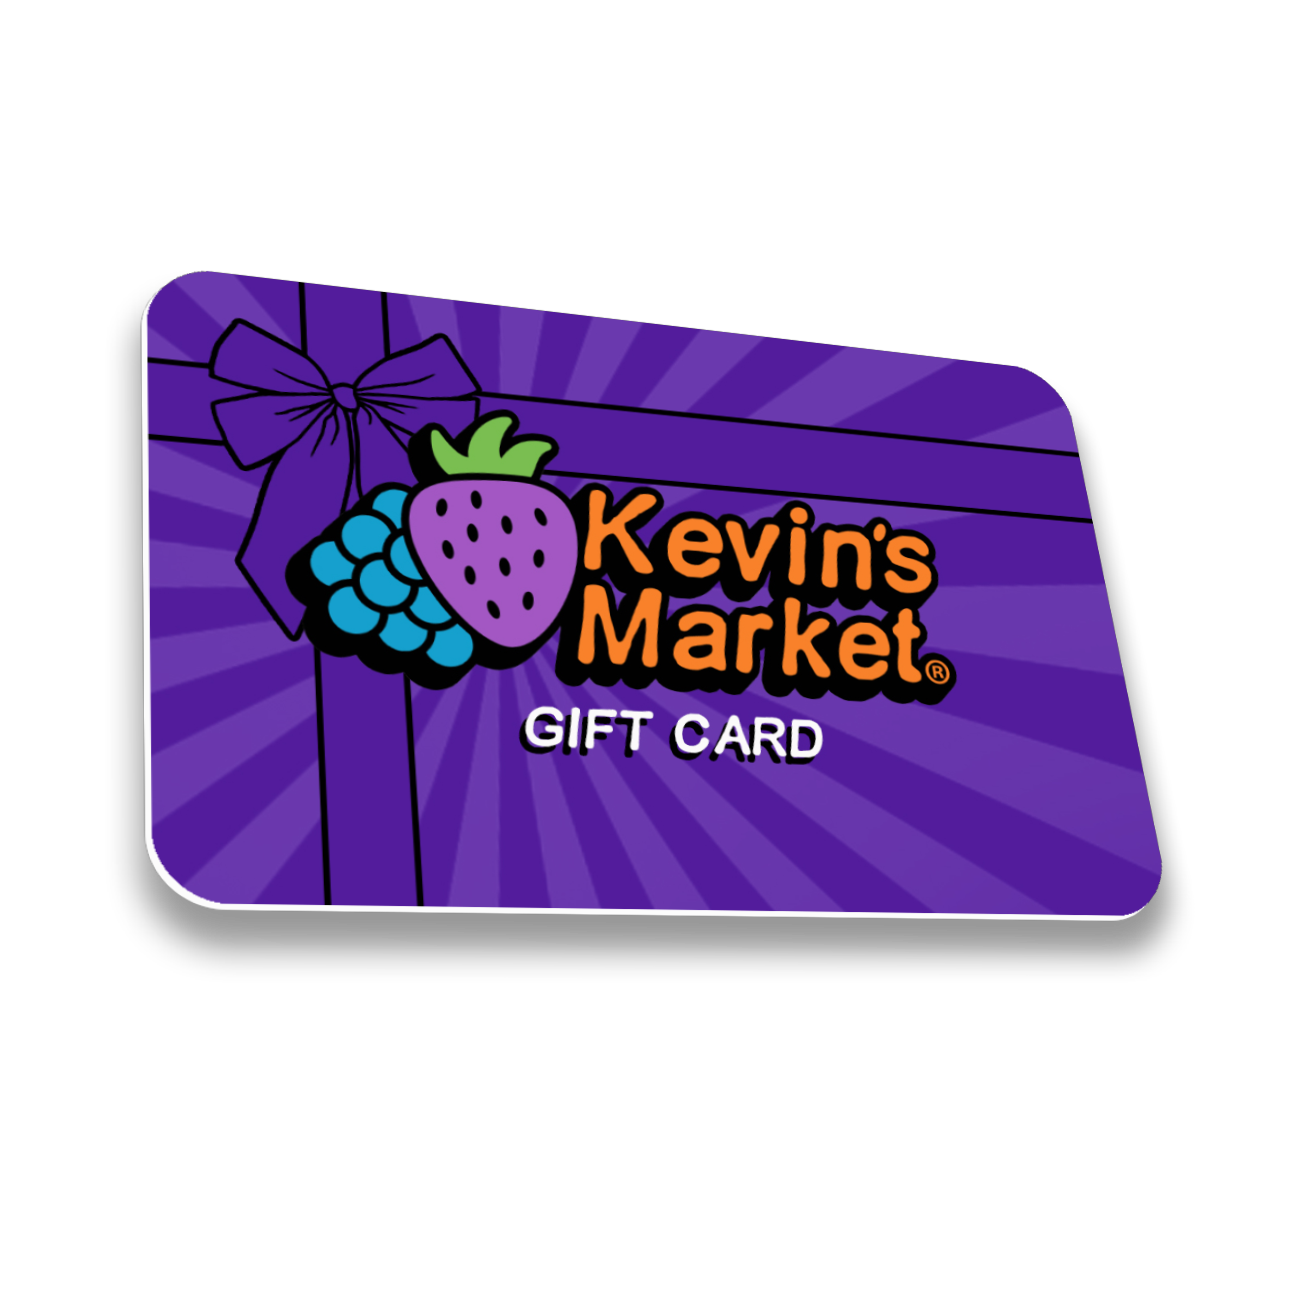 Kevin's Market Gift Card